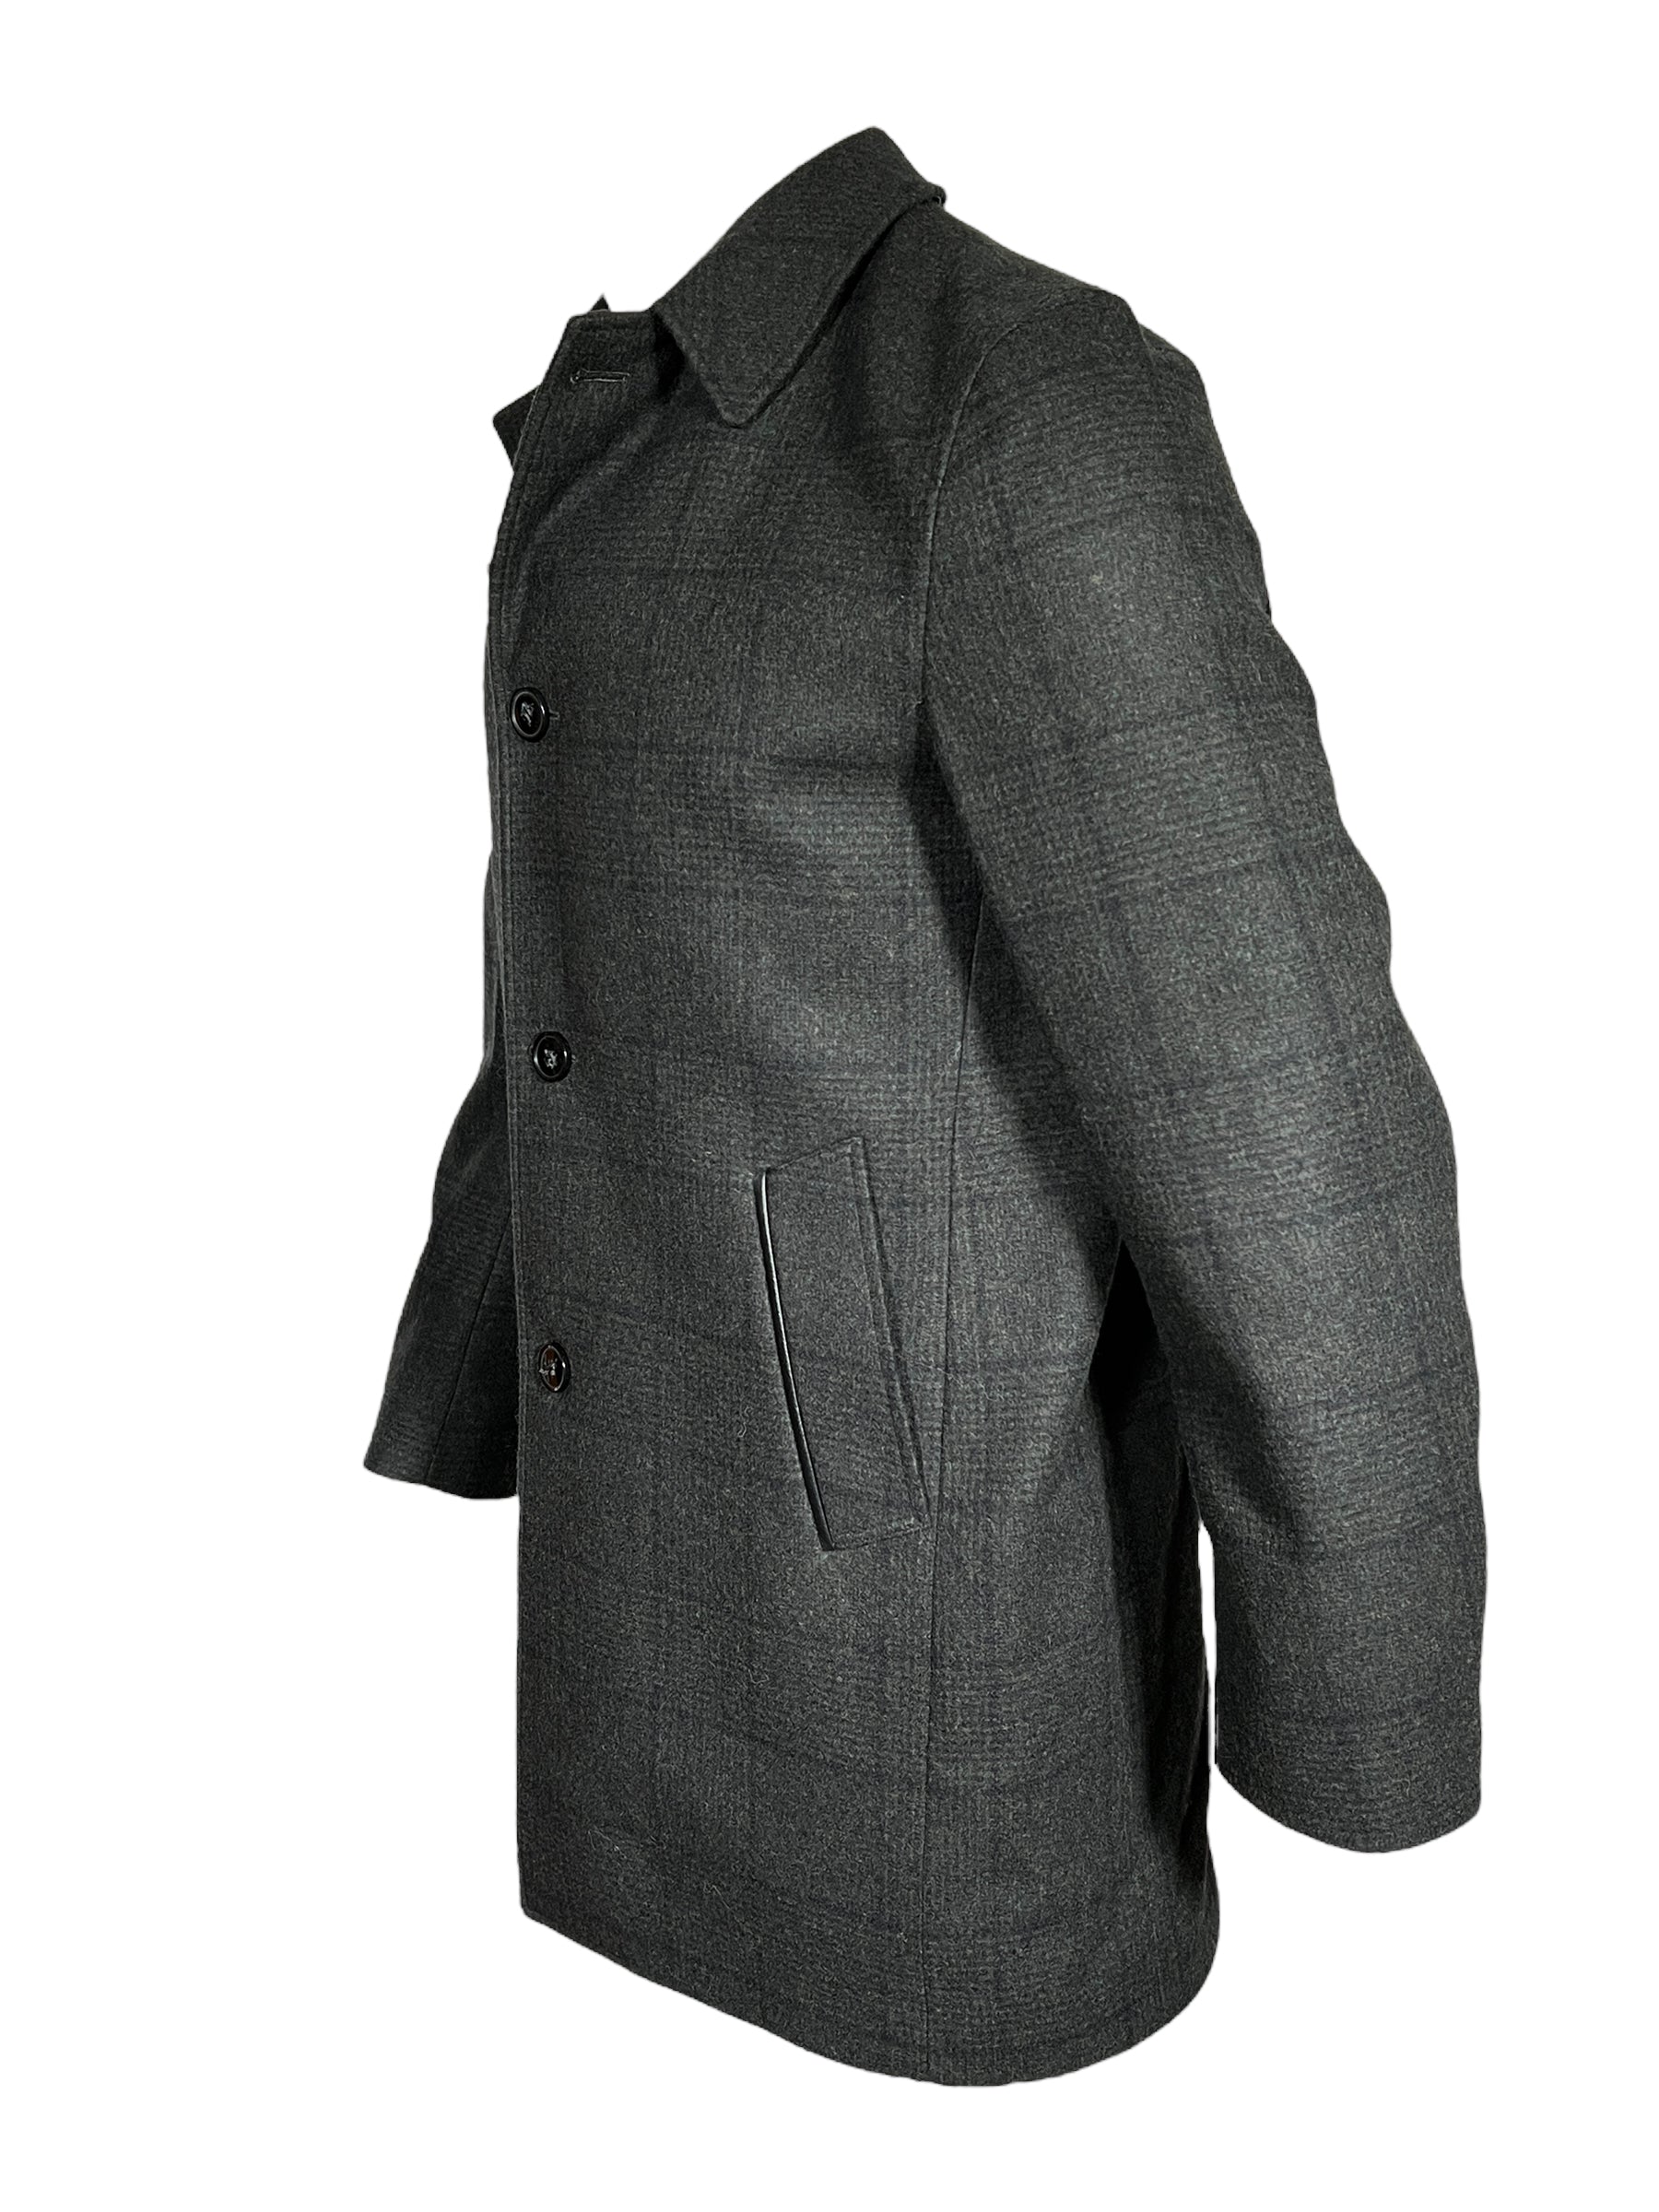 OARS & OLD IVY WOOL WALKING COAT WITH LEATHER TRIM - OLIVE PLAID